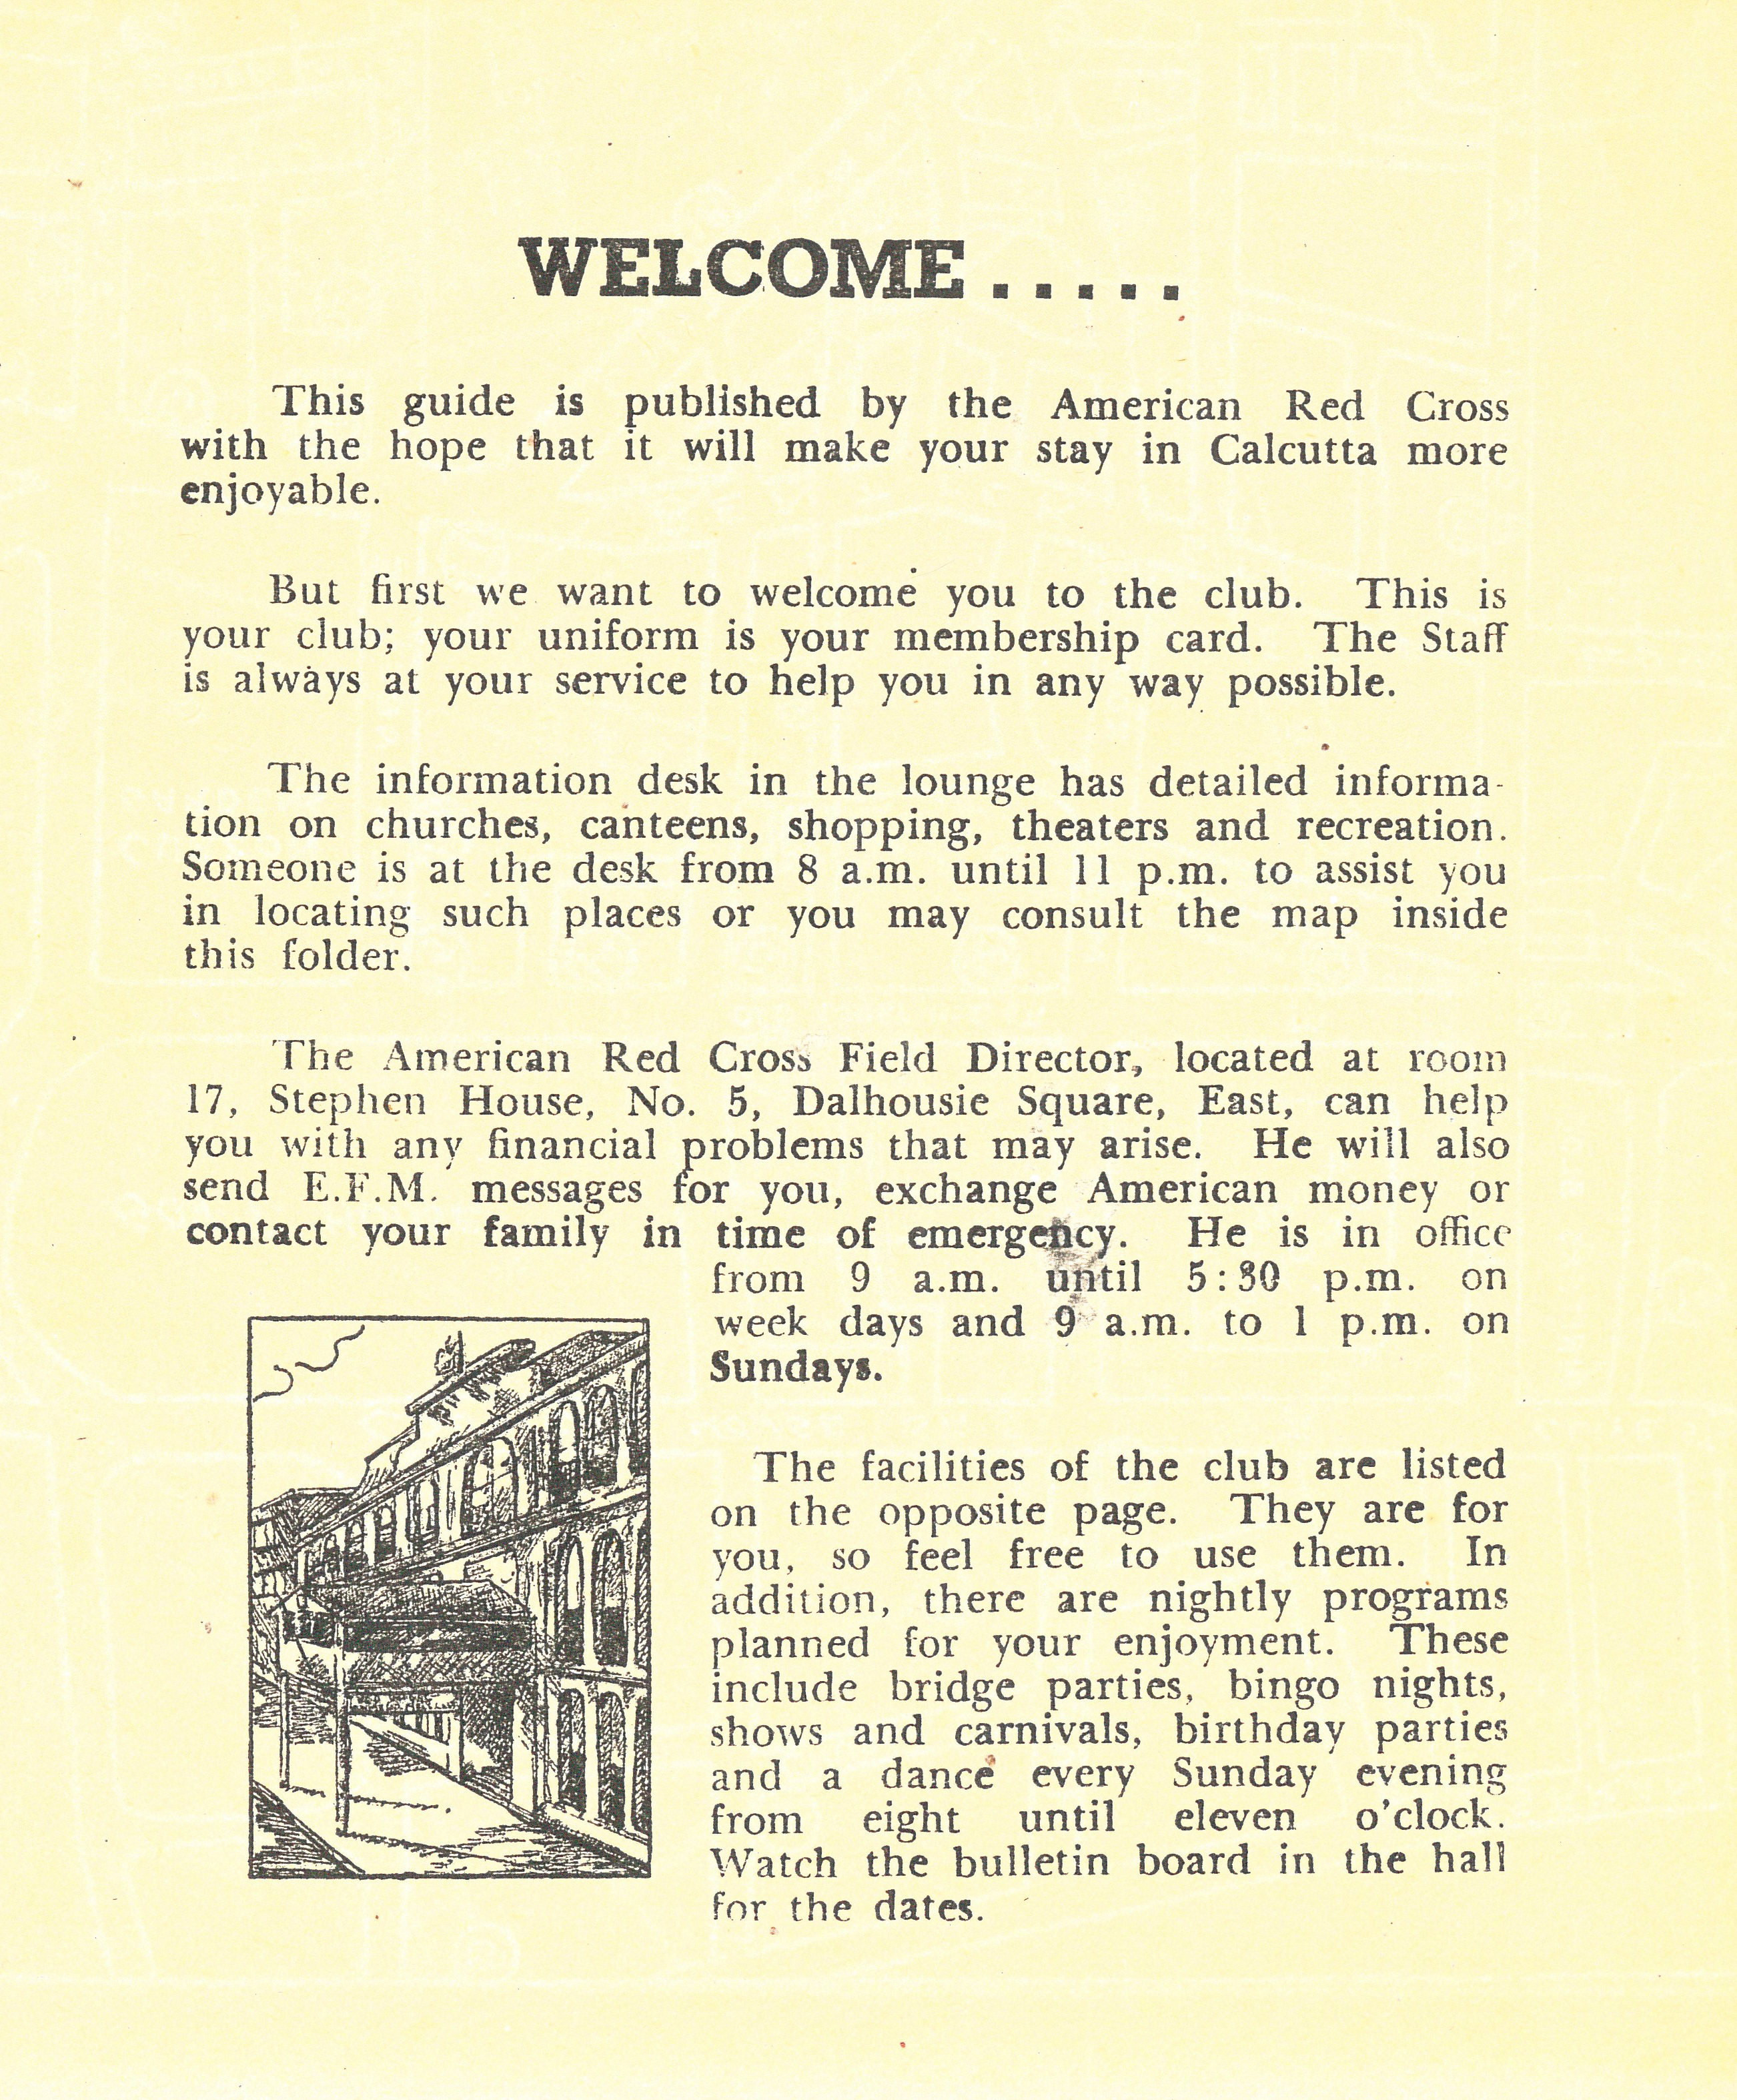 American Red Cross pamphlet 'Guide to Calcutta', May 1944, page 2 of 5